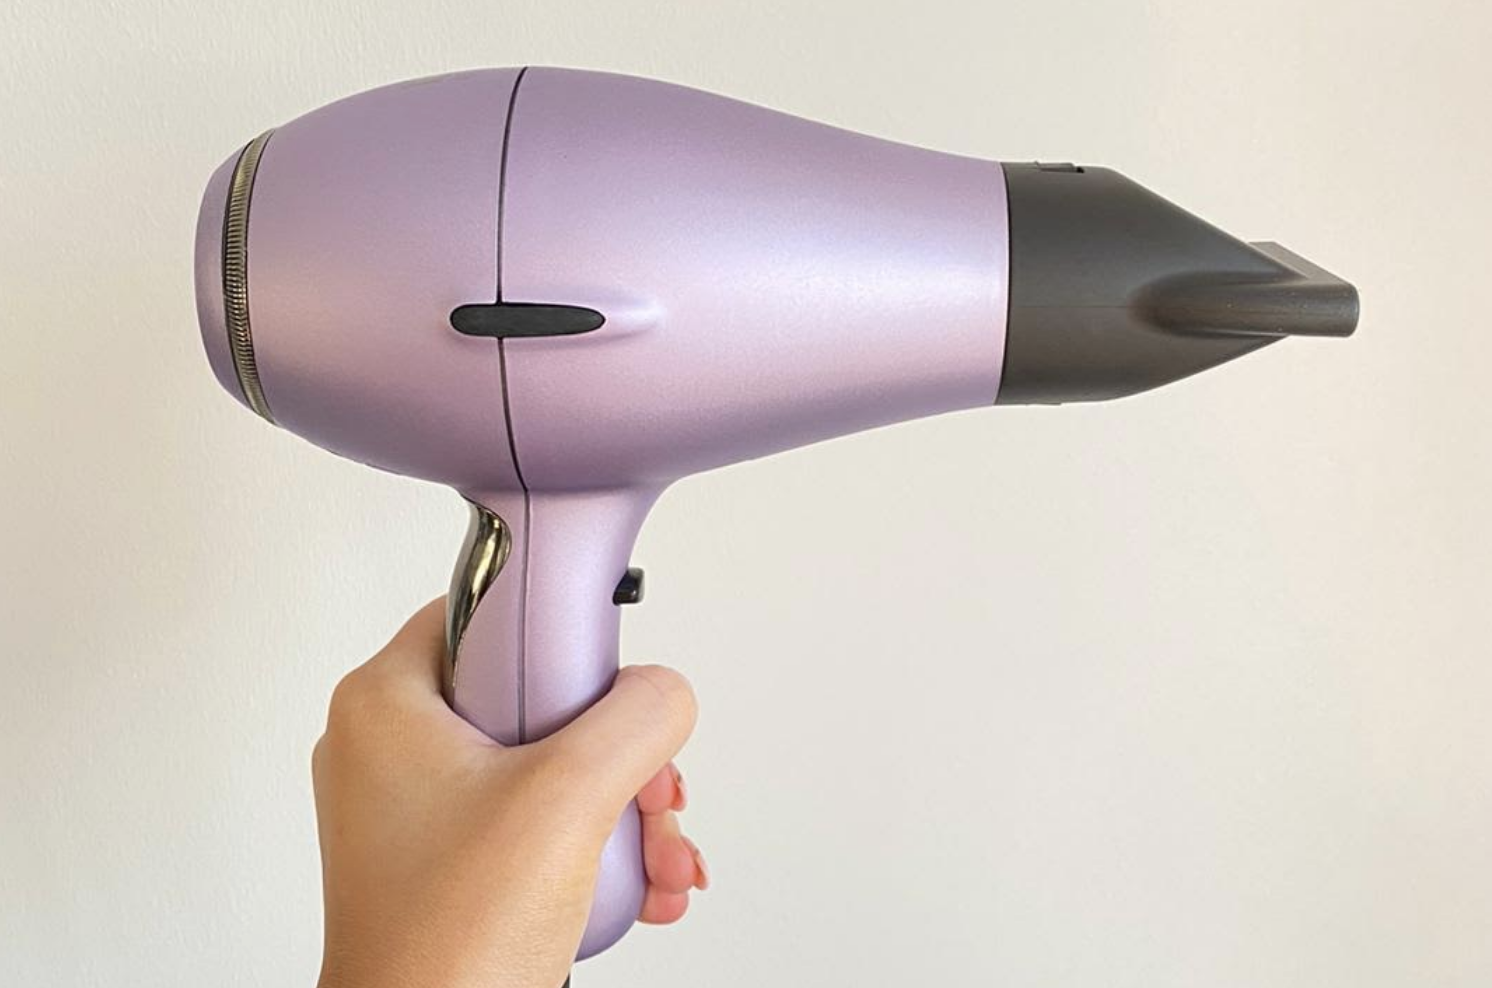 The Elchim 8th SENSE RUN hairdryer is one of the most ergonomic hairdryers on the market.